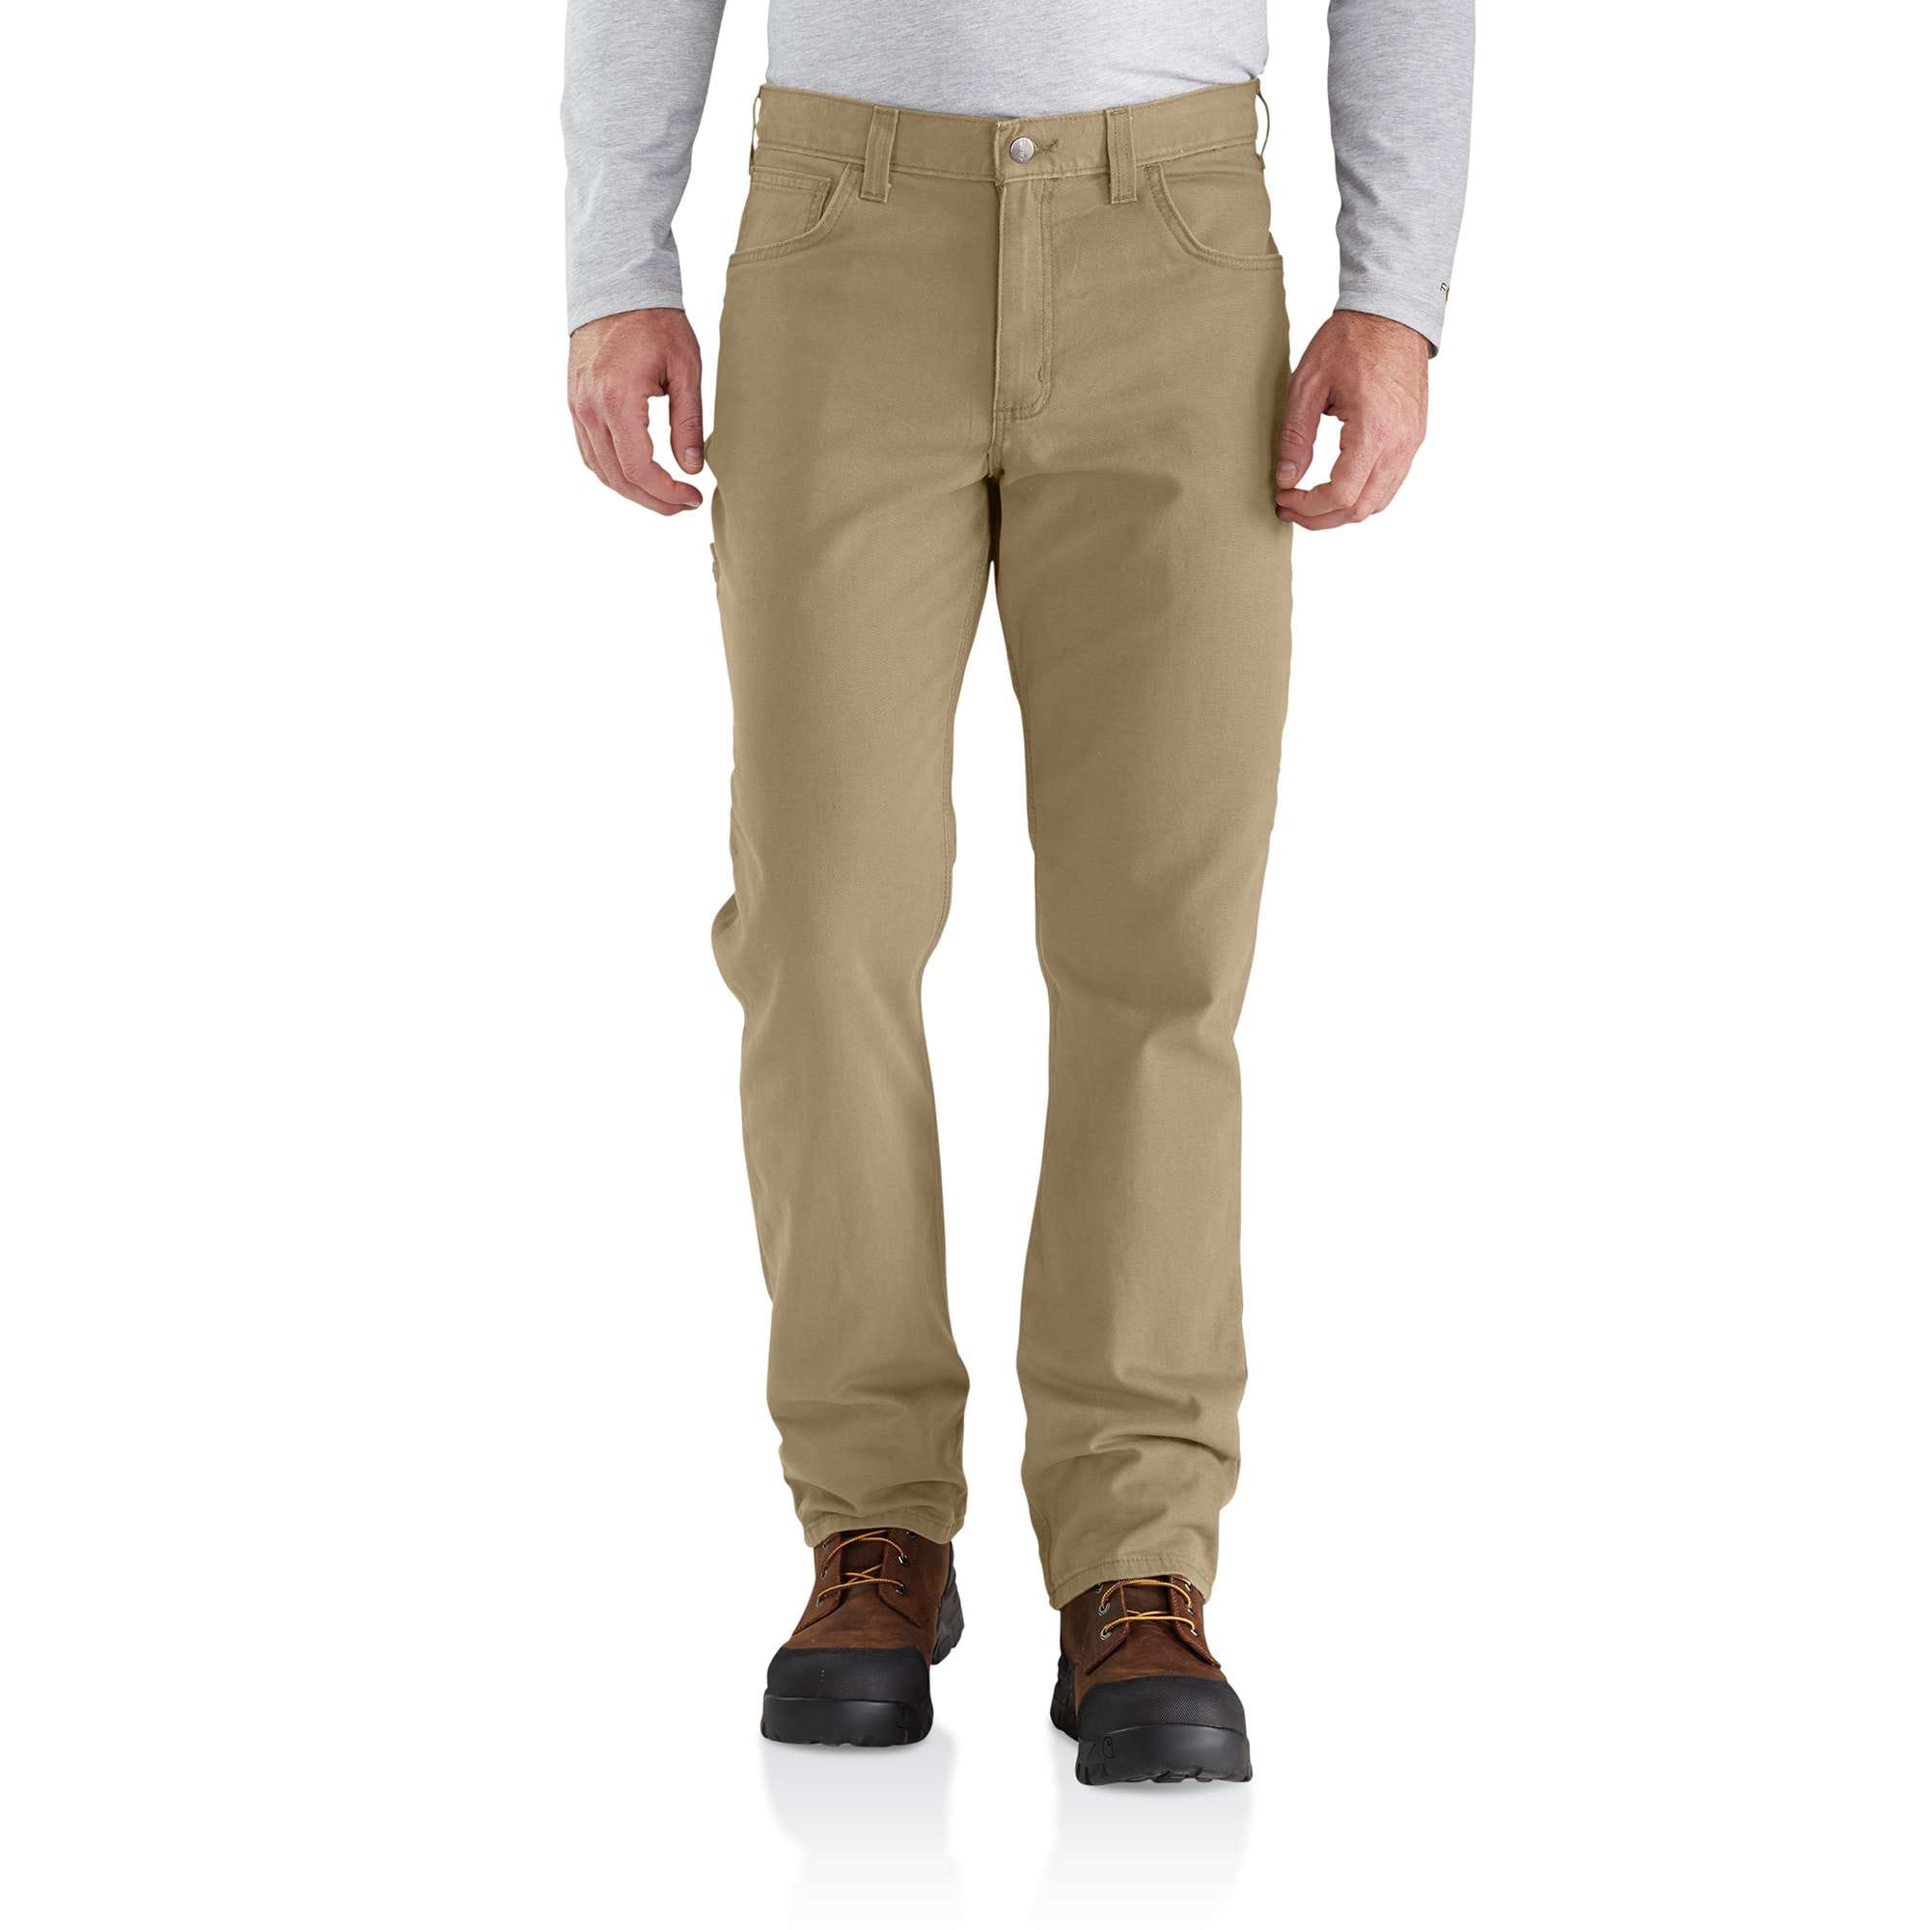 Relaxed Fit Straight Leg Cargo Work Pants, Men's Pants